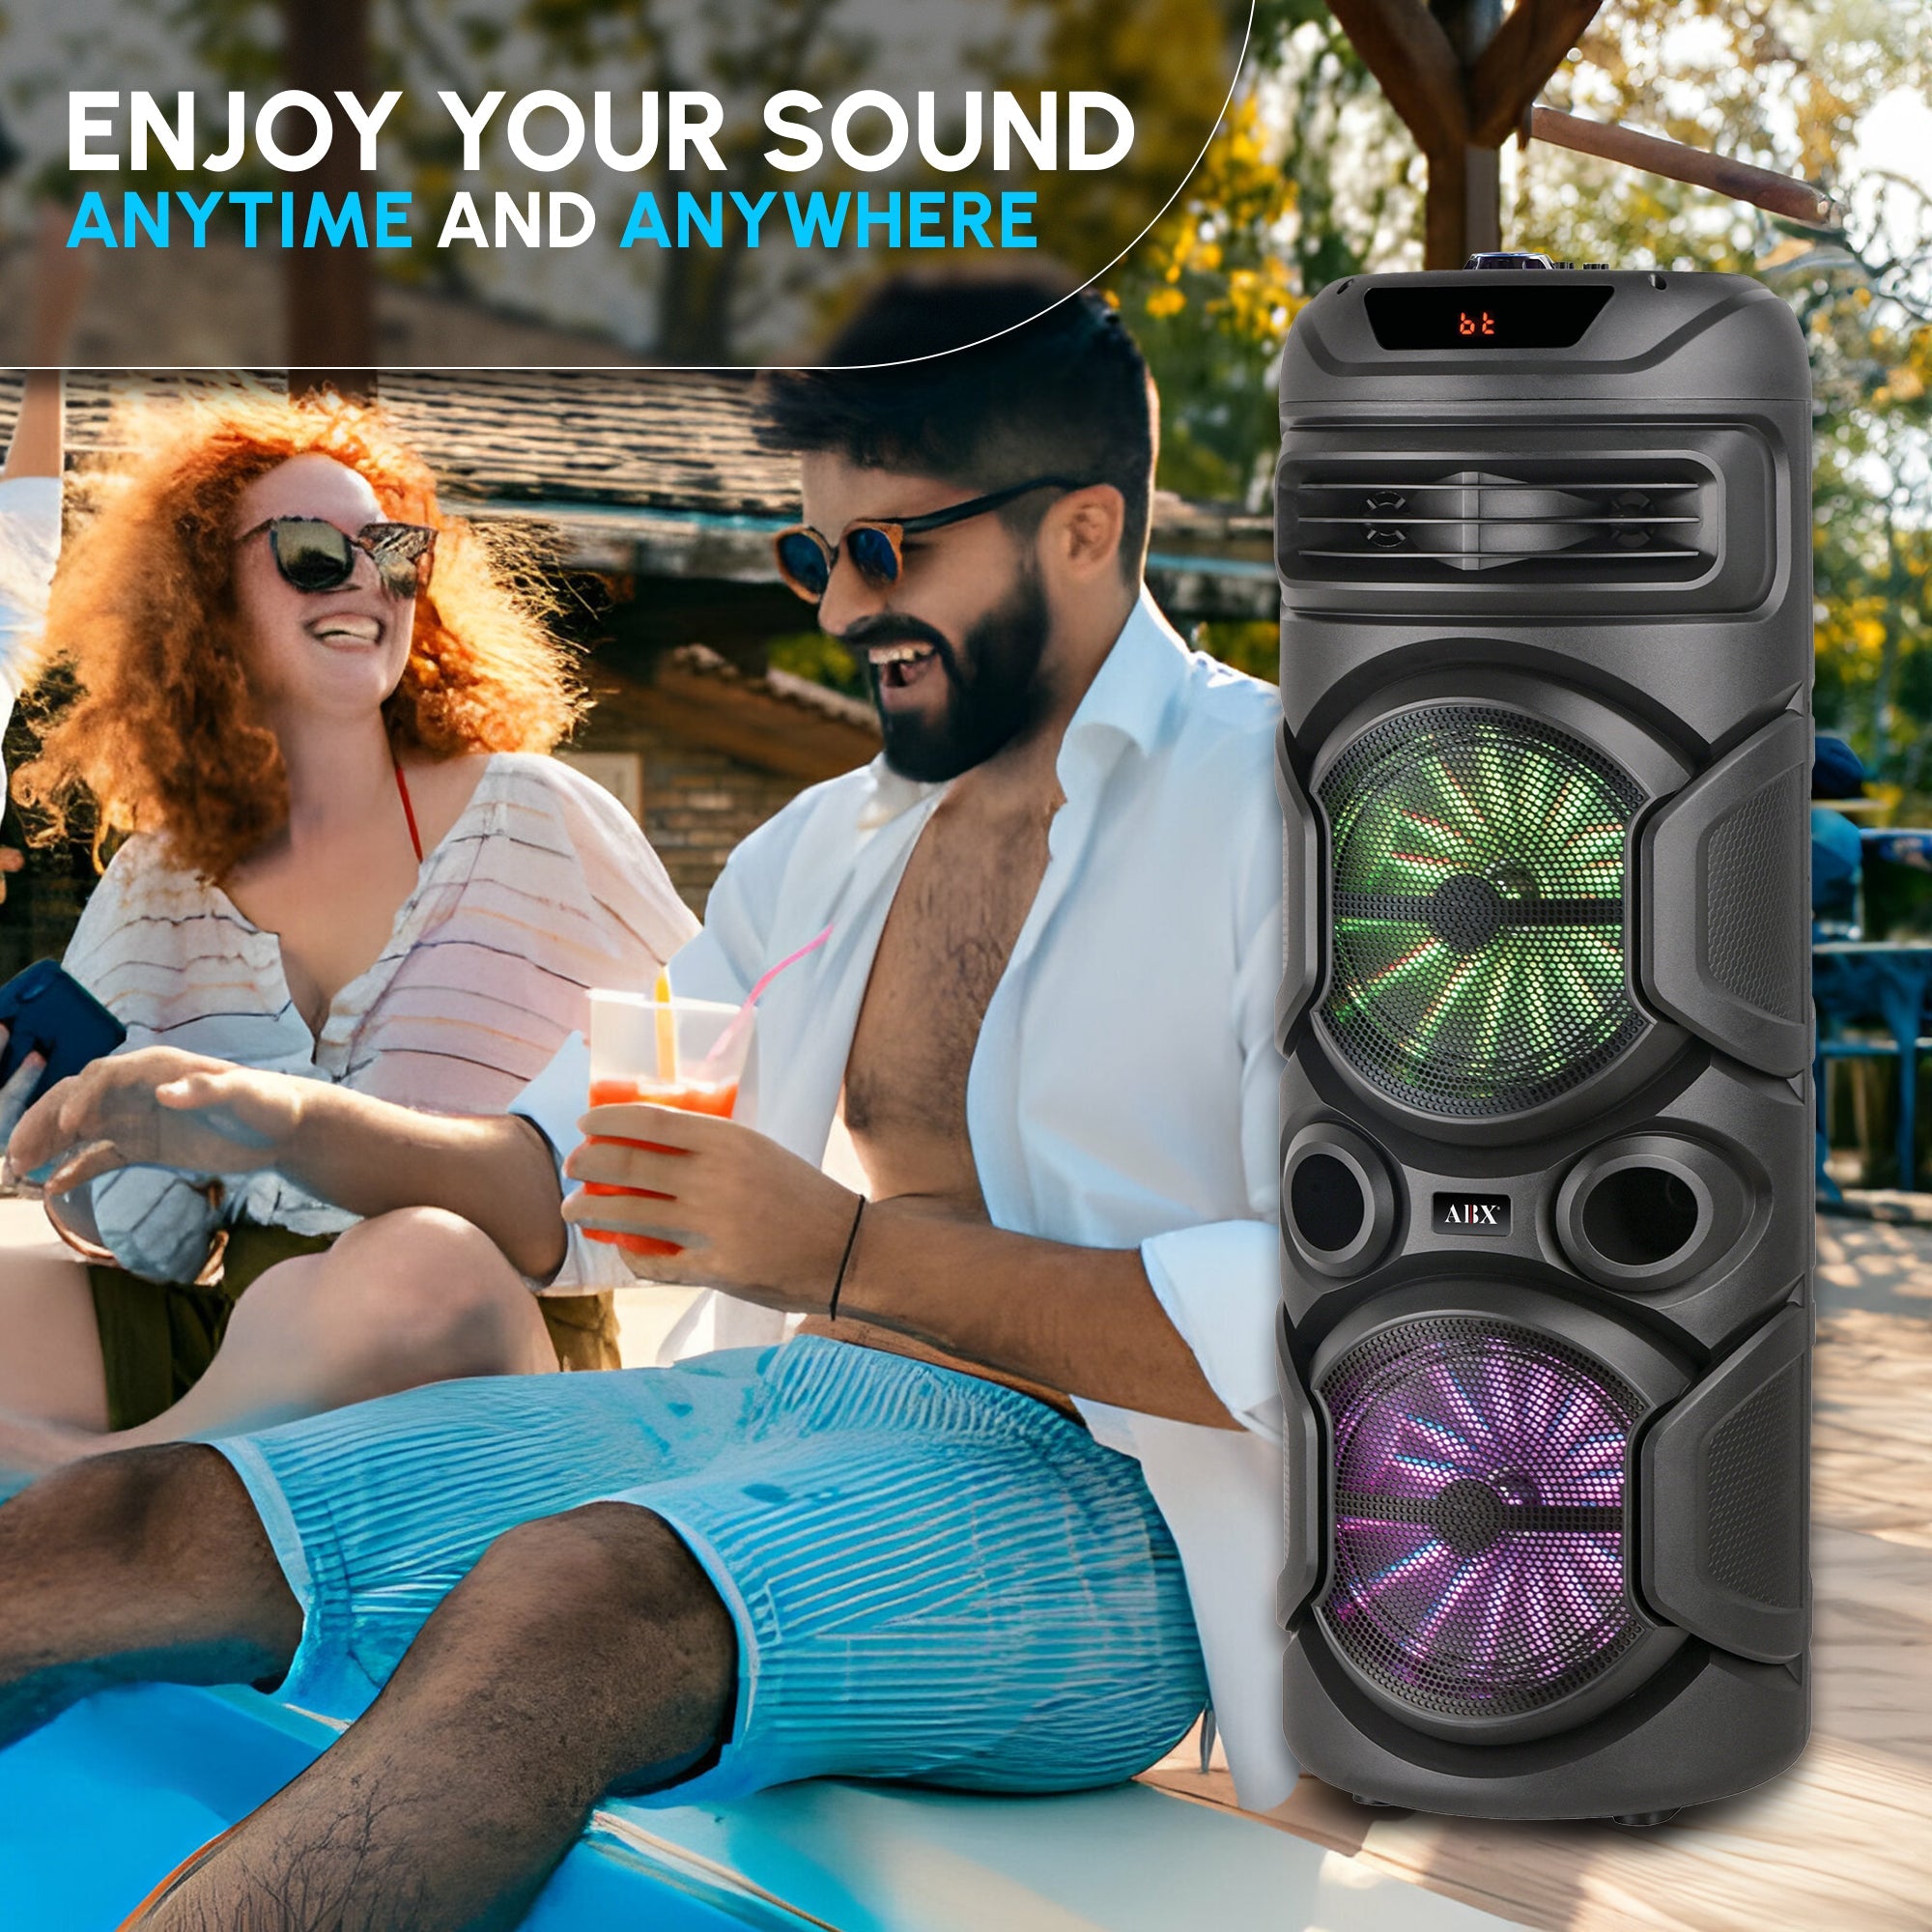 Audiobox ABX-2900R Fun &amp; Loud Dual 8&quot; Bluetooth Speaker with Microphone - Light Weight with RGB Lights, Dual Channel Sound Board for Parties - Top ElectrosKaraoke SpeakerABX-2900R810059431690